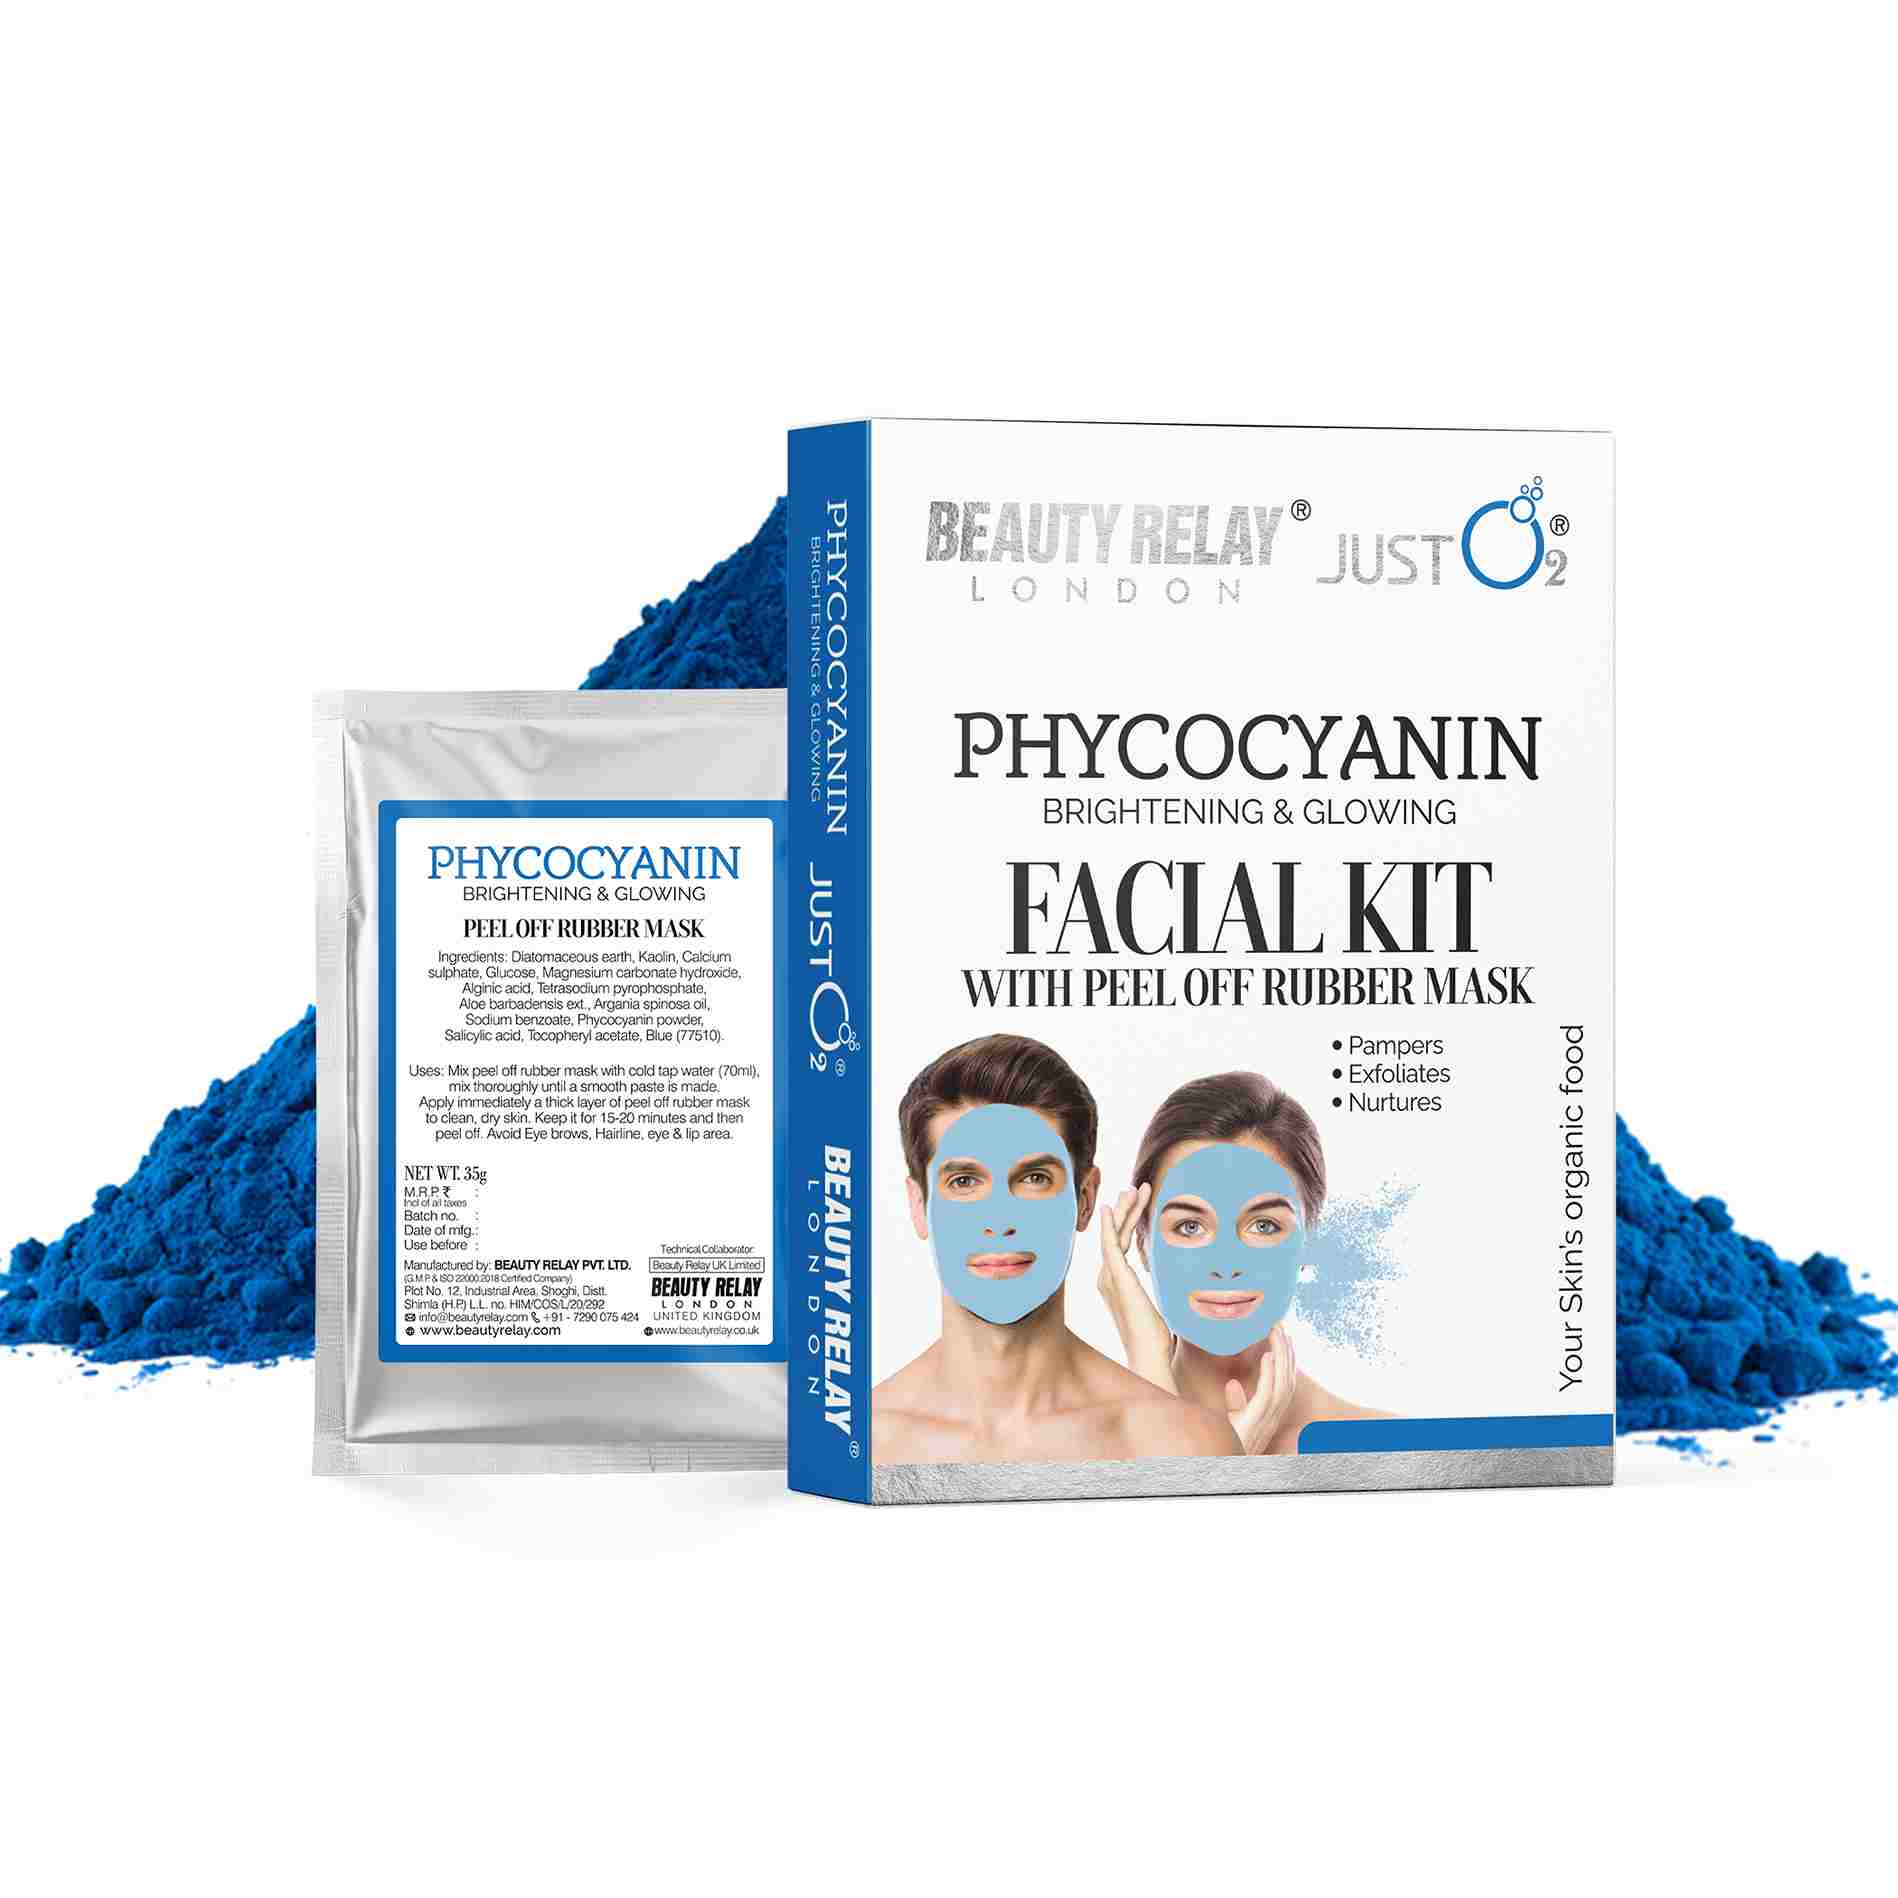 Phycocyanin Facial Kit with Peel-off Rubber Mask